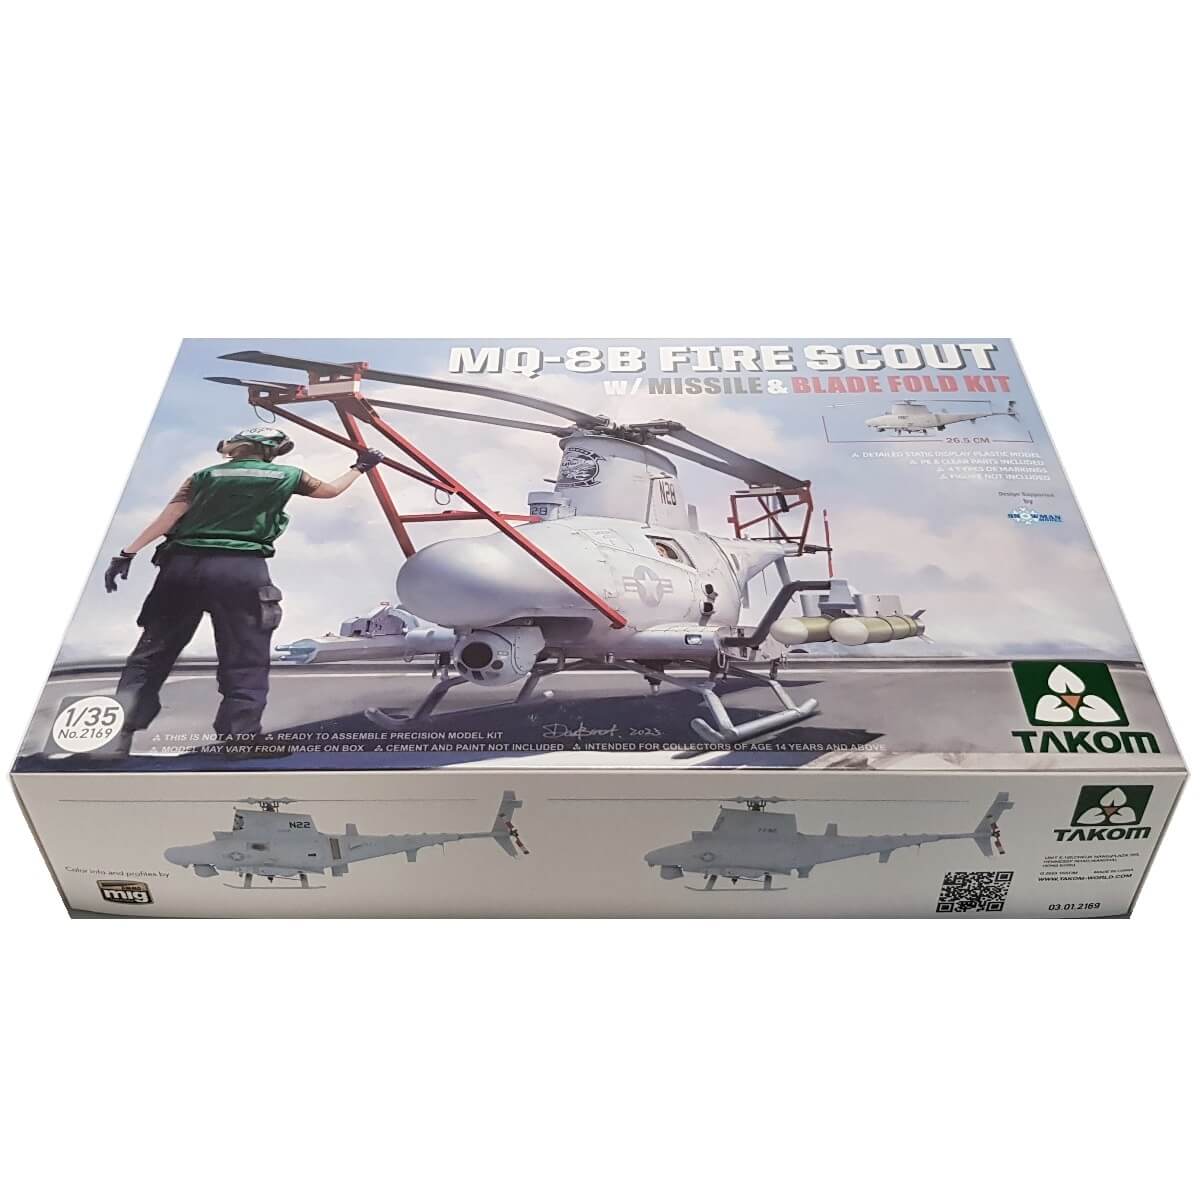 1:35 MQ-8B Fire Scout with Missile and Blade fold kit - TAKOM